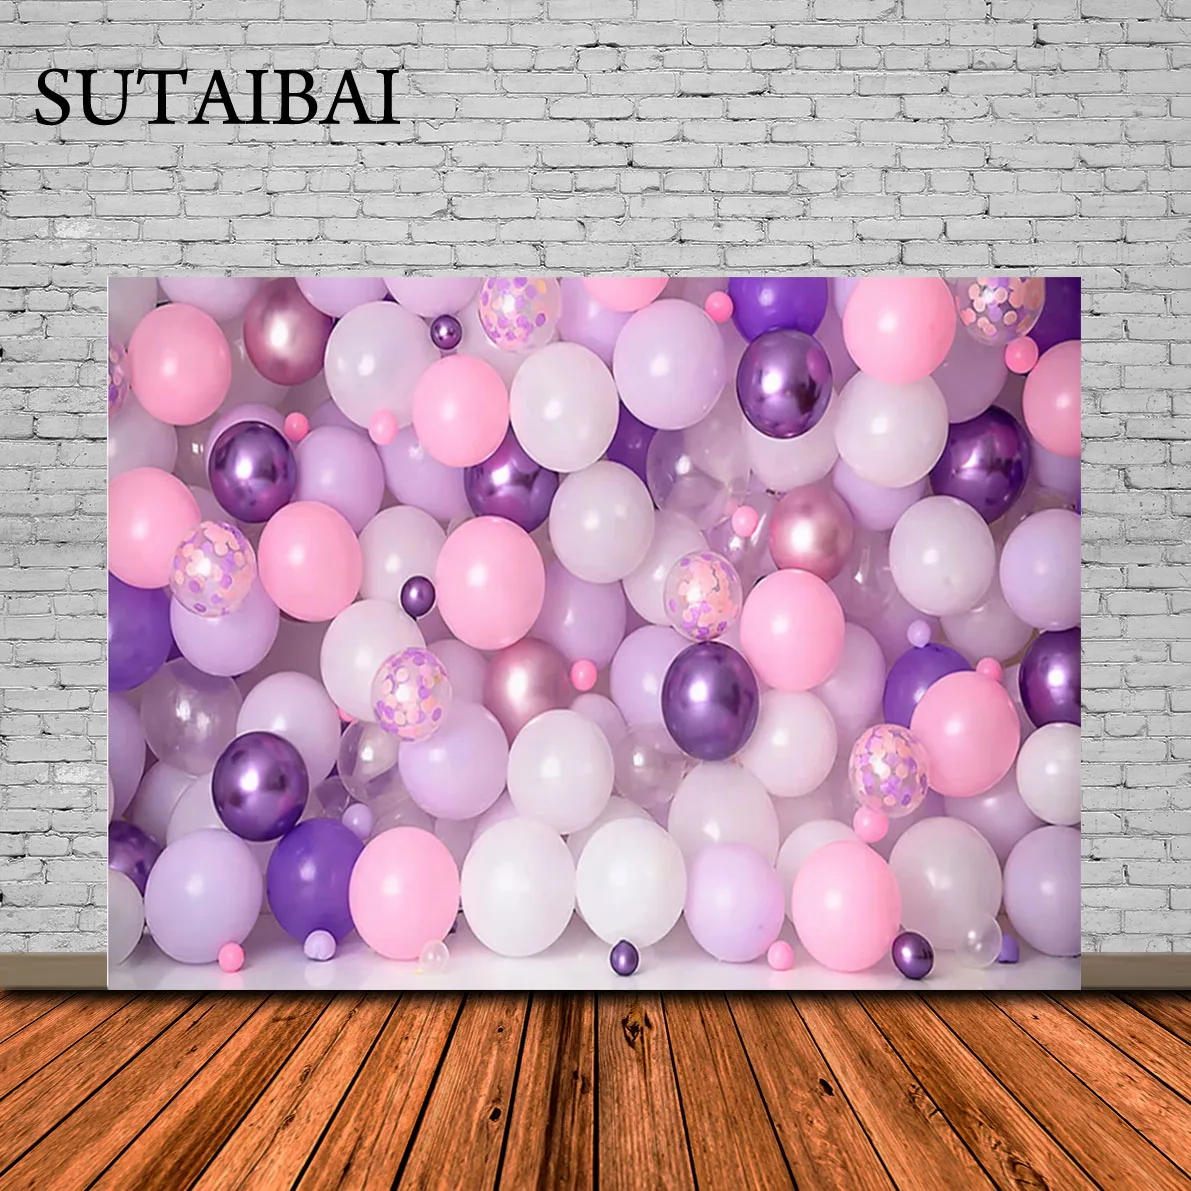 Purple Balloon Wall Backdrop for Photography Girls Newborn Kids Baby Cake Smash Photo Booth Background Birthday Portrait Props